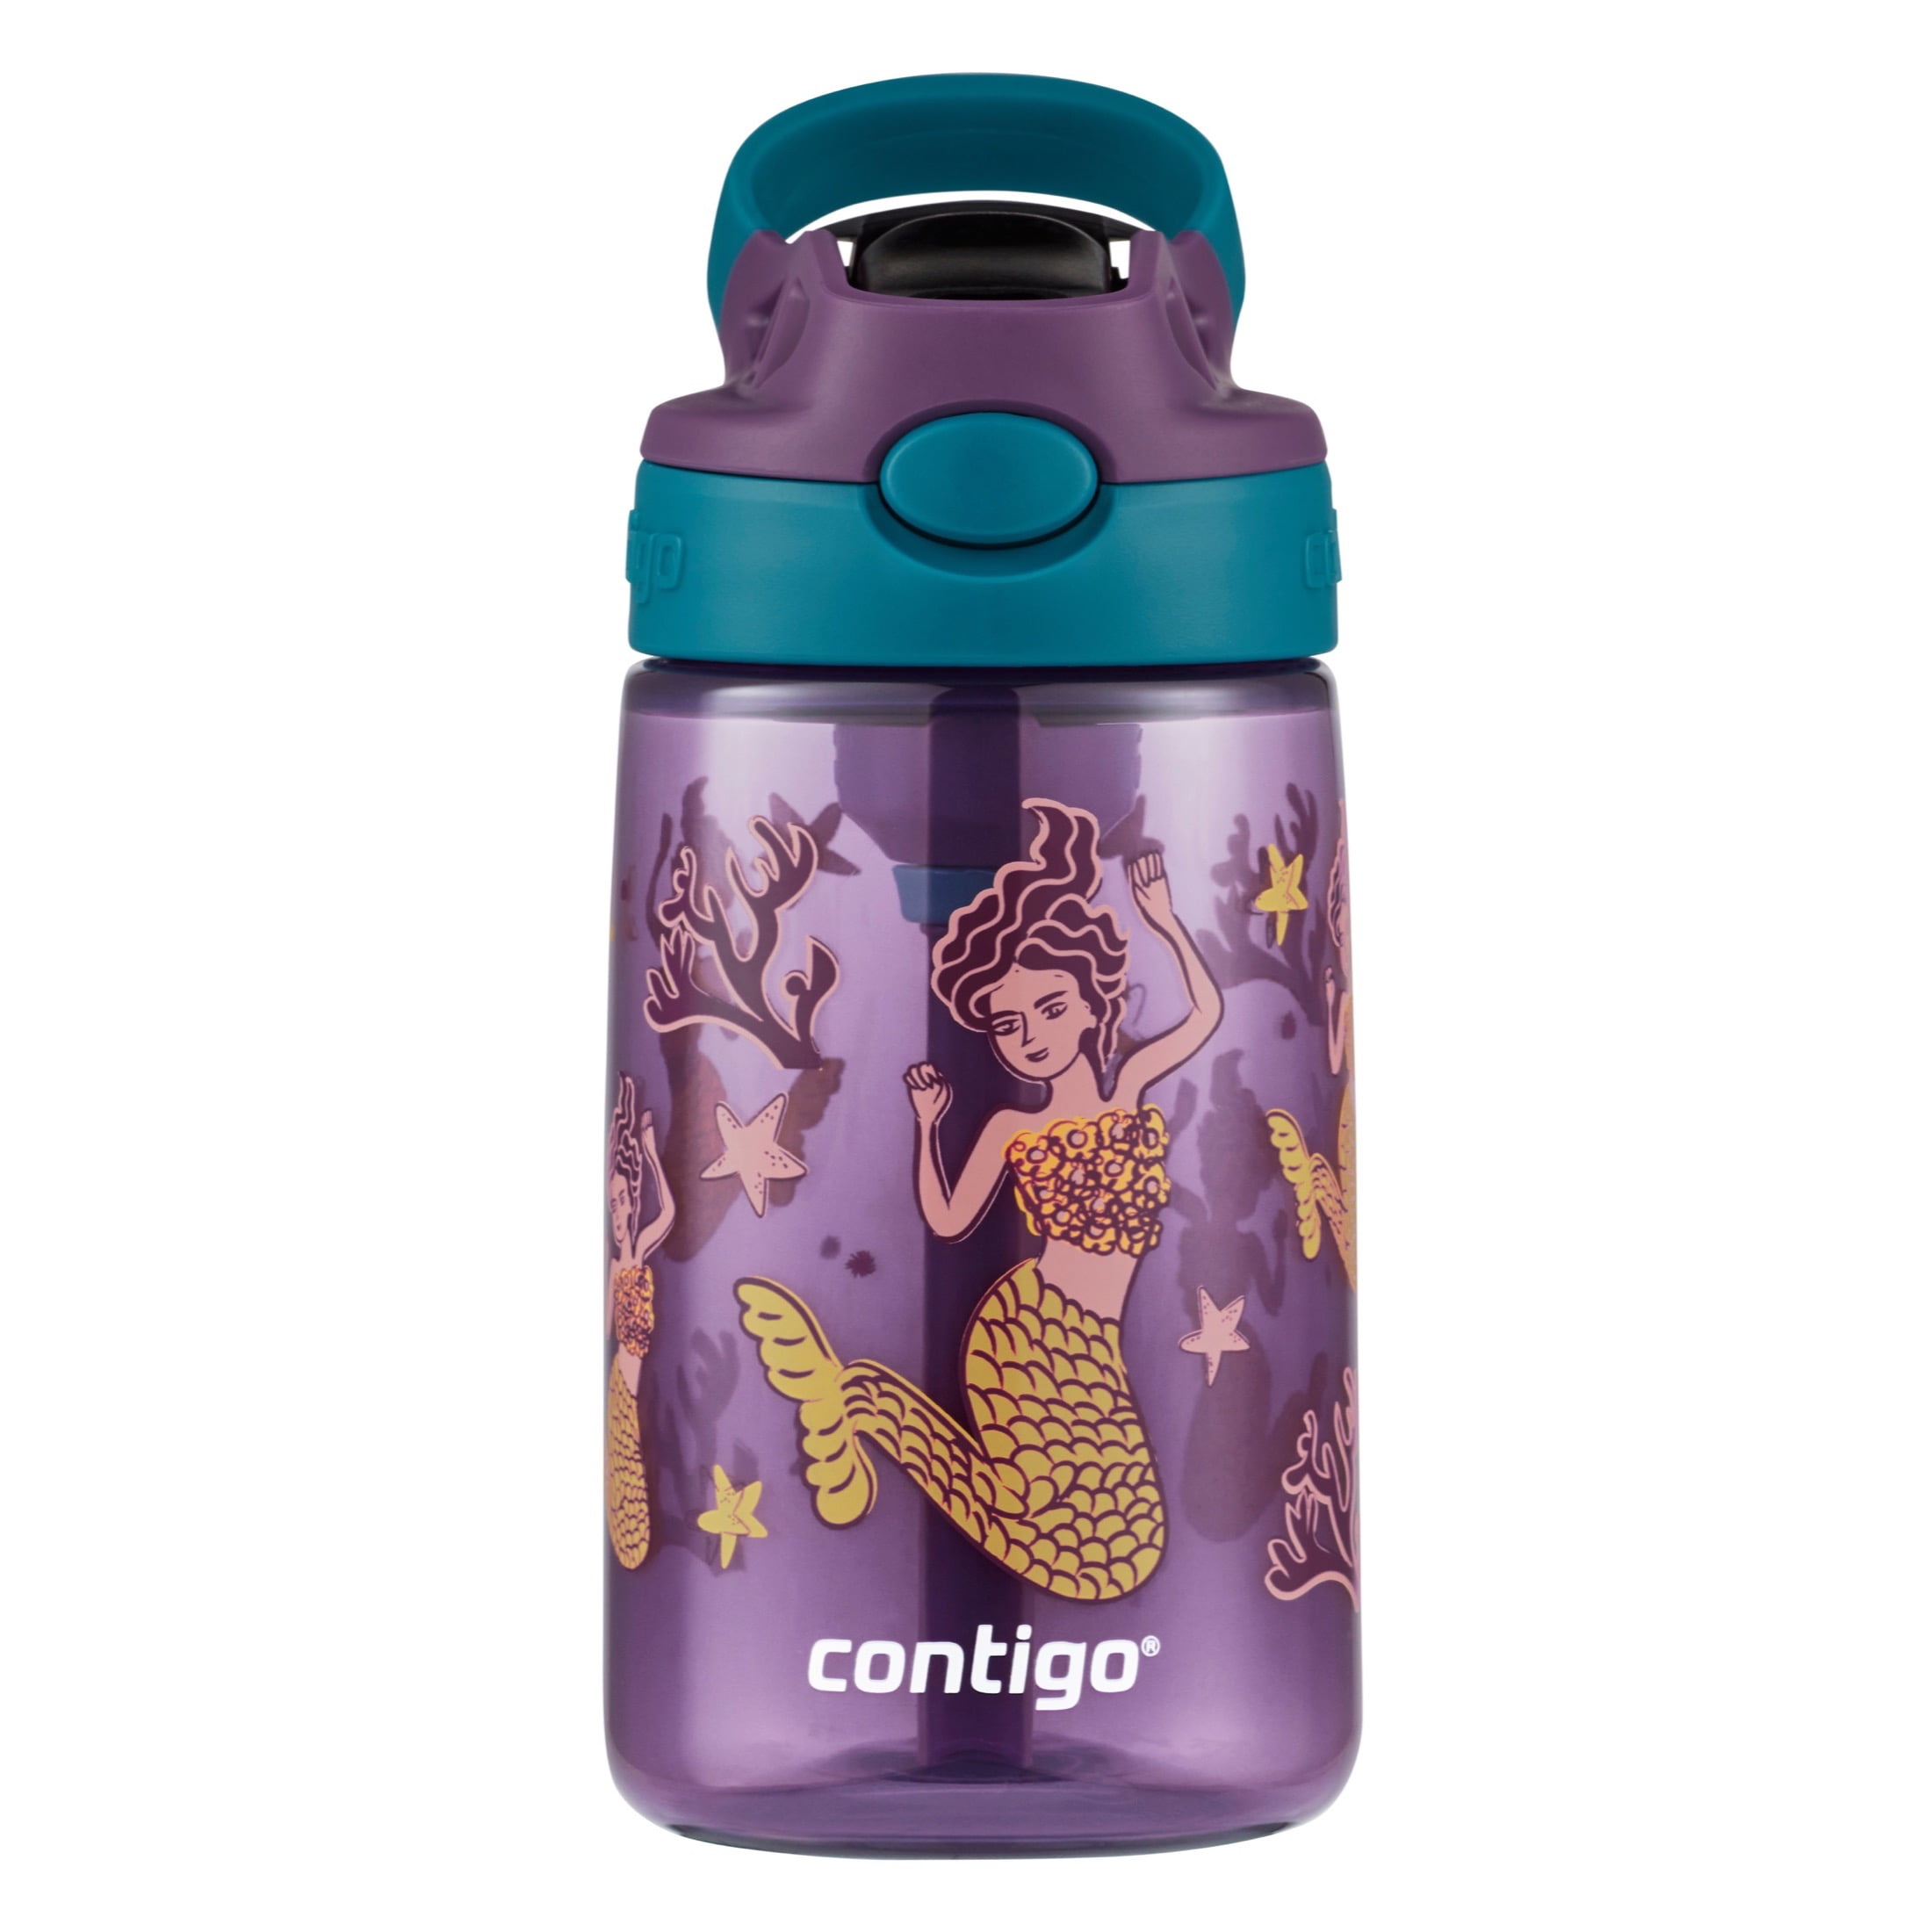 Contigo Kids Water Bottle with Redesigned Autospout Straw Lid Dinos and Taro/Juniper, 14 fl oz., 2 Pack, Size: 14 oz